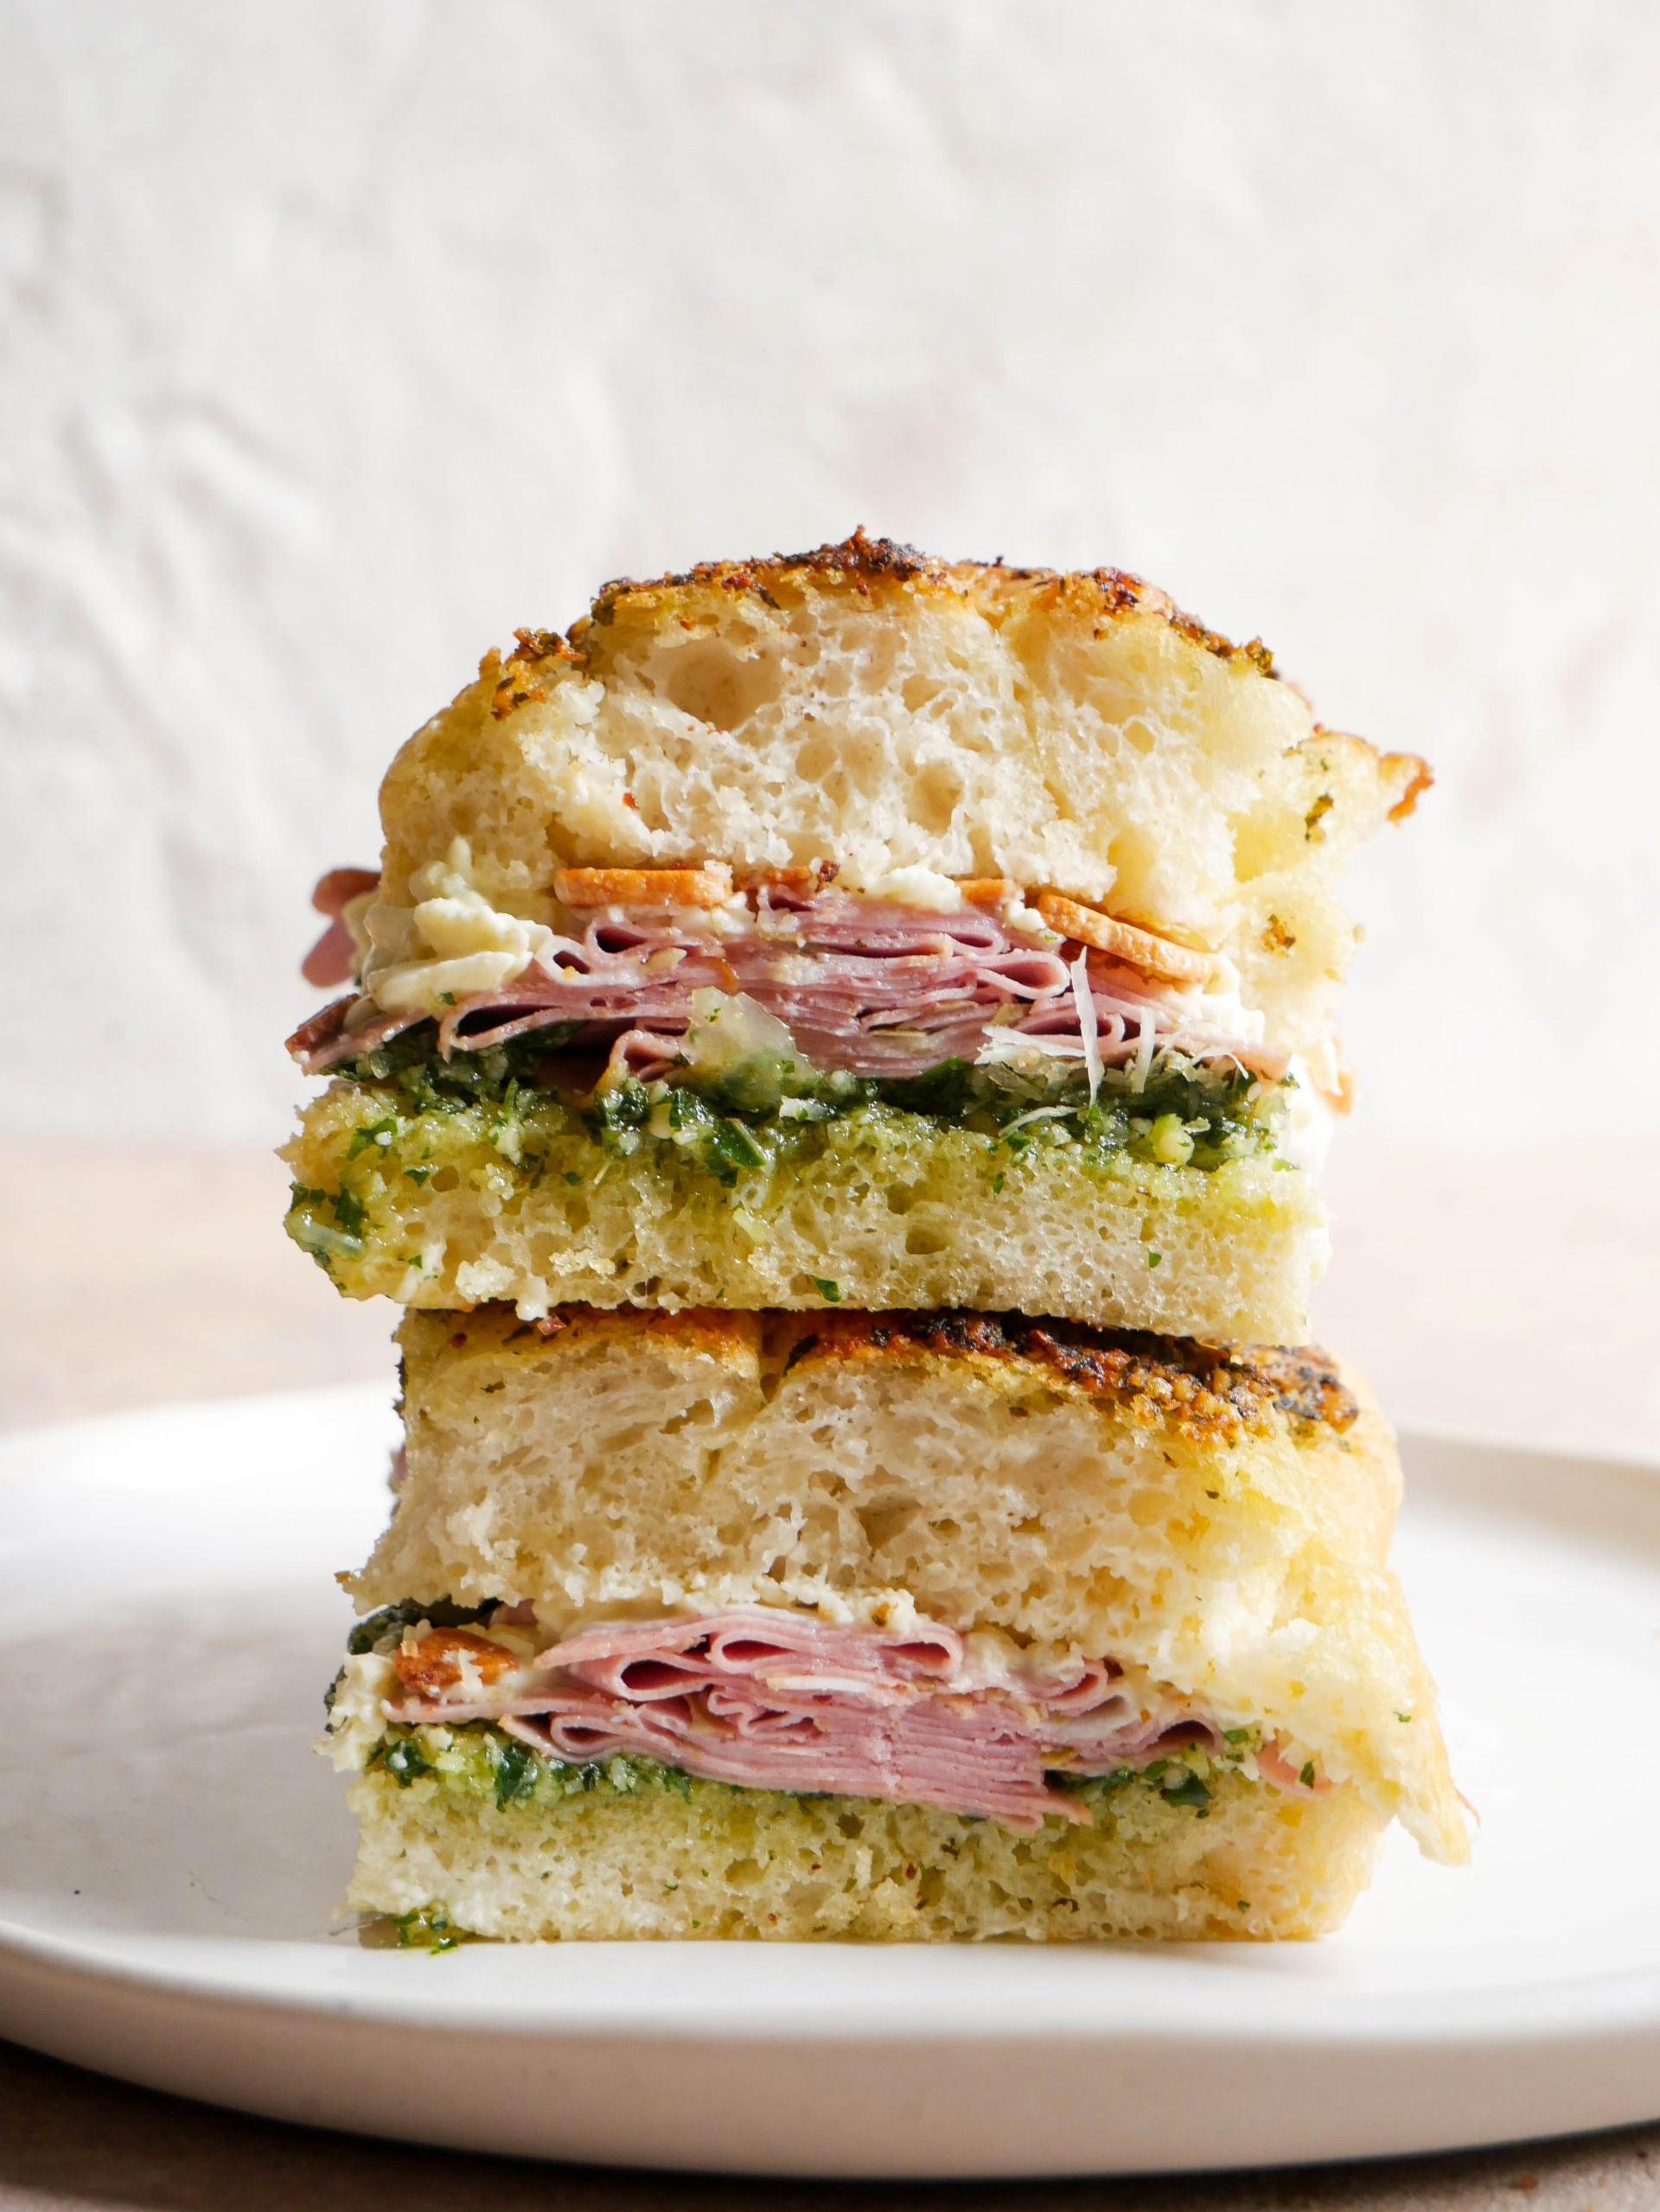  Melted cheese and mortadella combine to make a gooey mess worth indulging in